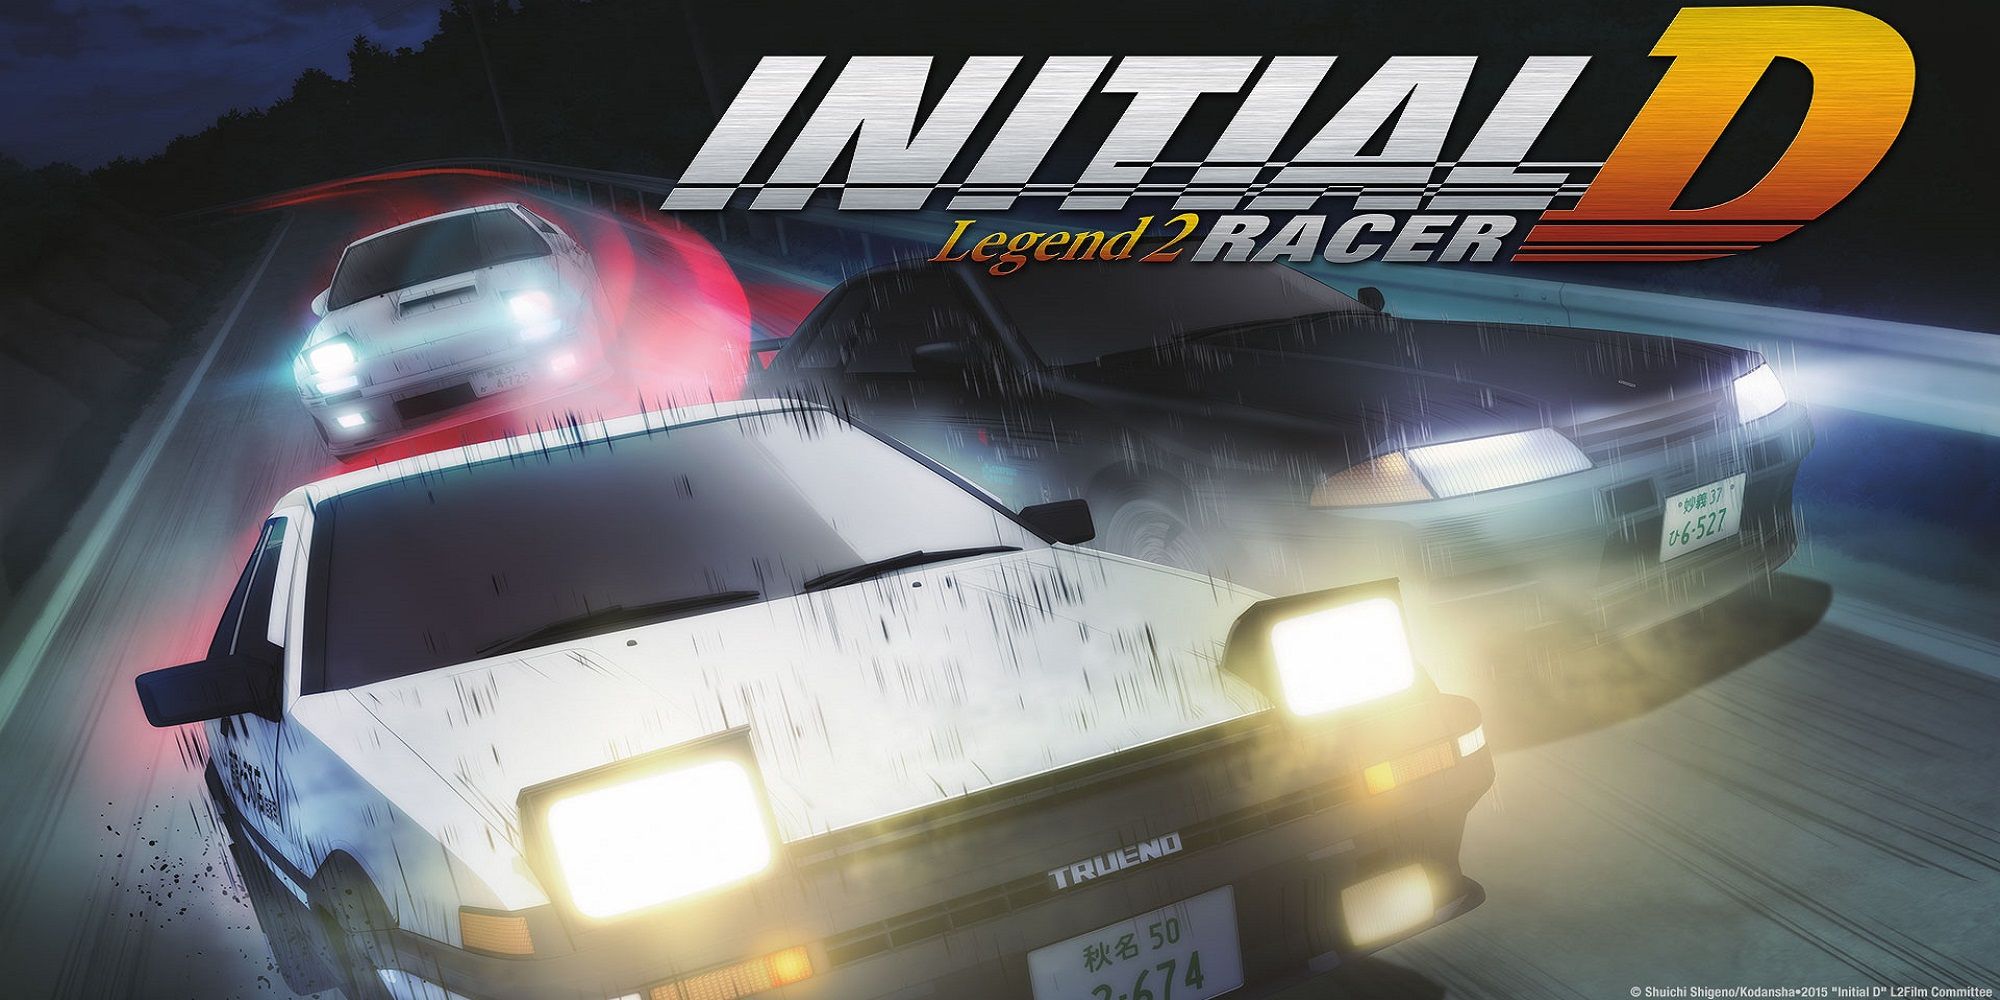 Initial D Legend 2 Racer's cover centered on the protagonists